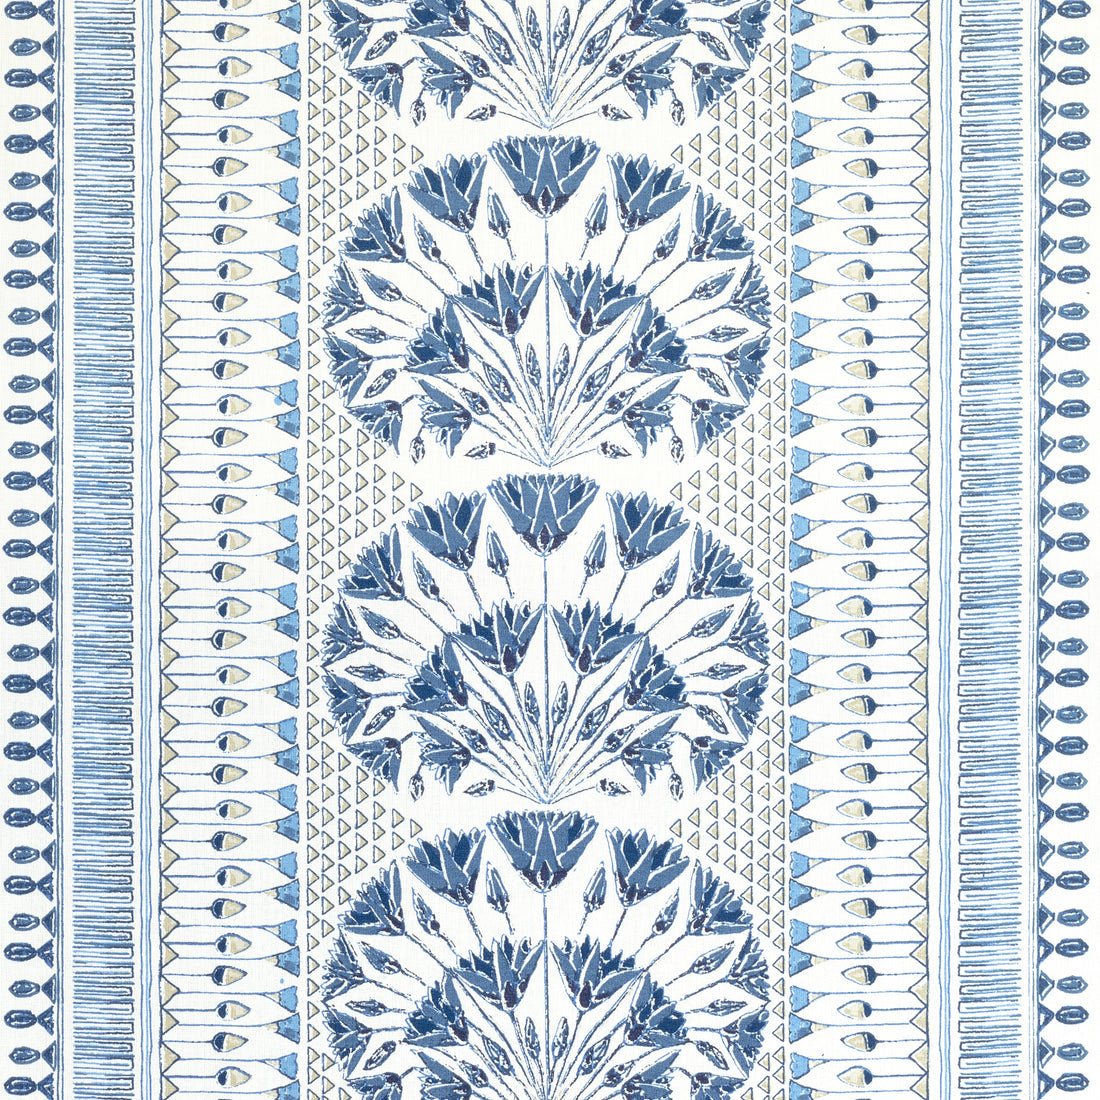 Cairo fabric in blue and white  color - pattern number AF9624 - by Anna French in the Savoy collection